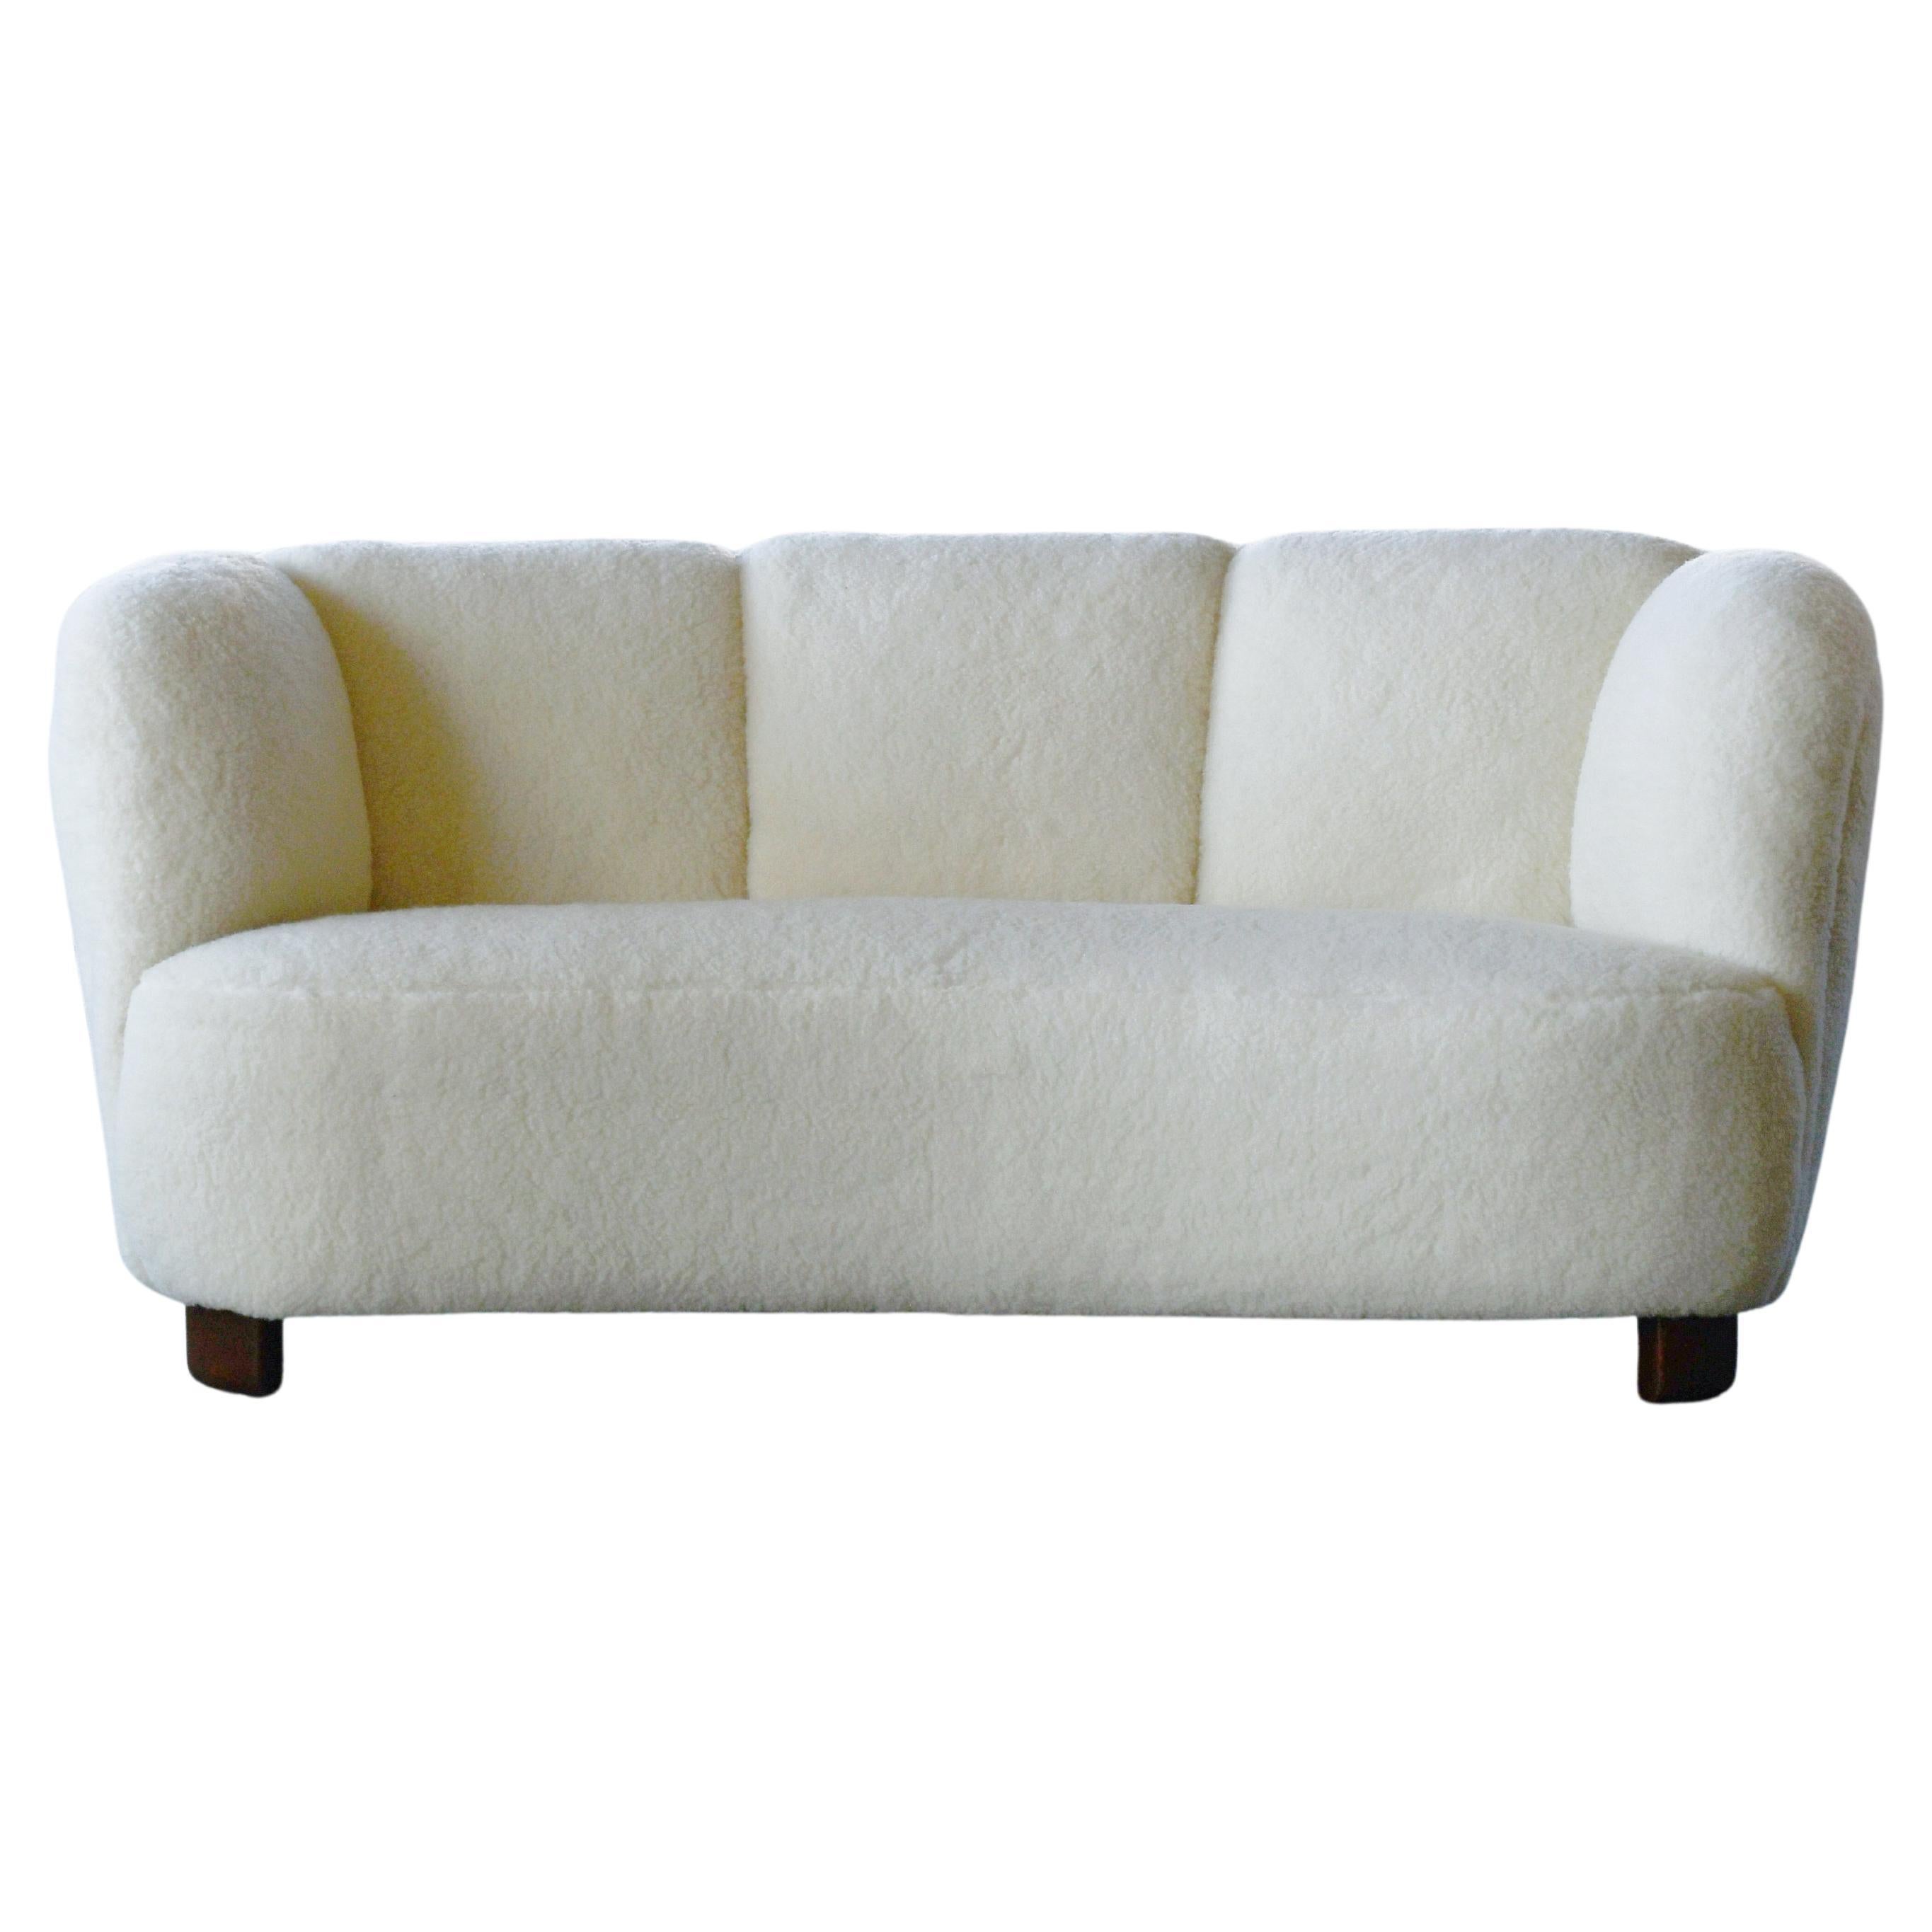 Danish 1940s Banana Shaped Curved Loveseat in White Lambswool For Sale